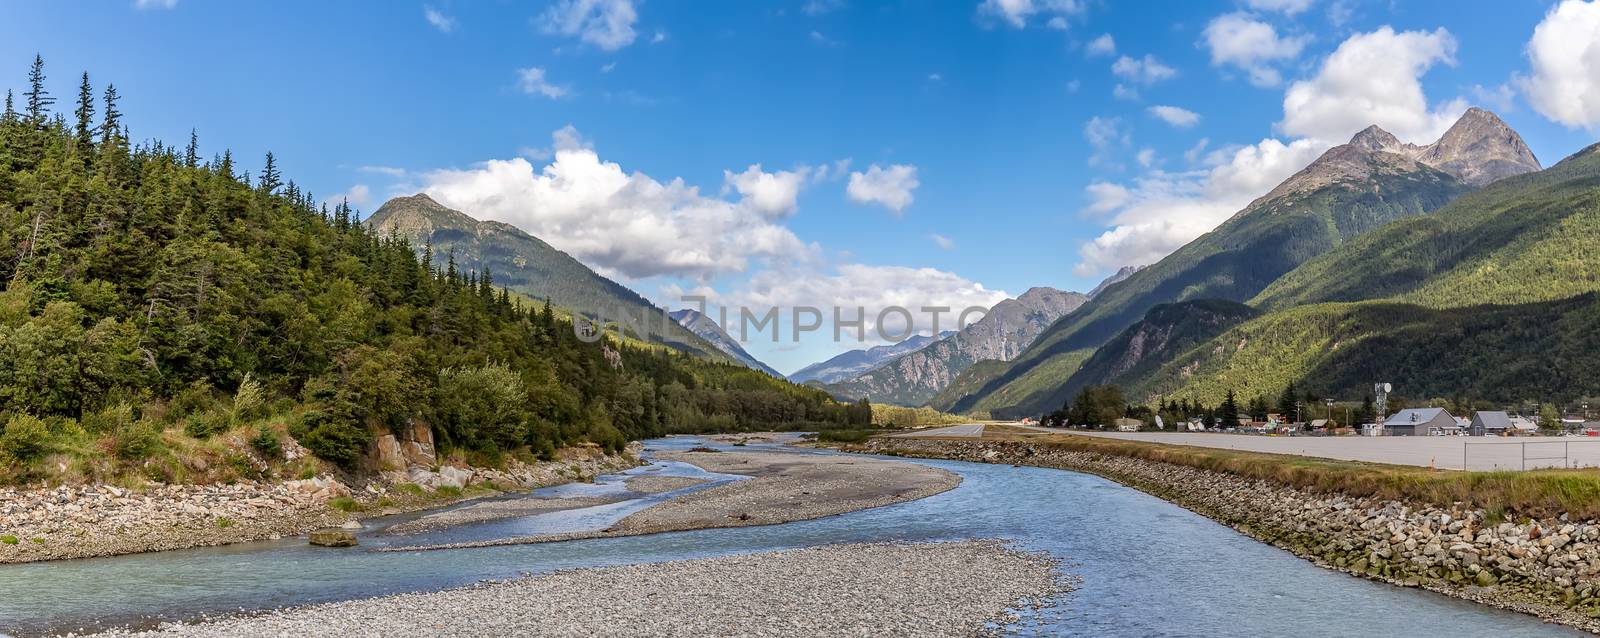 View of shallow Skagway River and Skagway airport in Alaska. Blue cloudy sky and mountain peaks in the background.